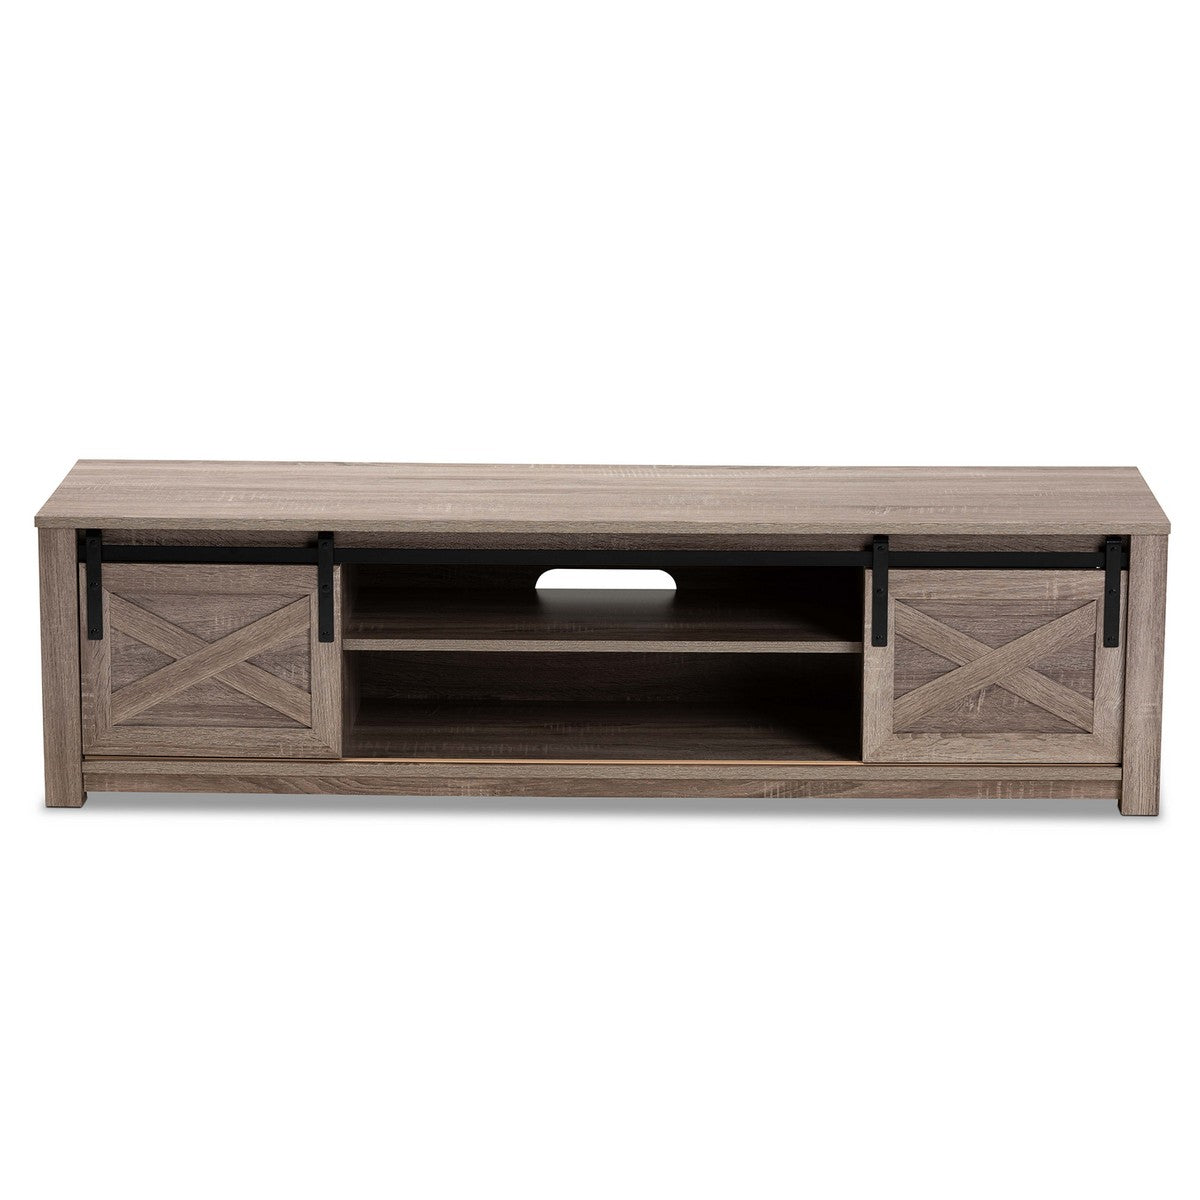 Baxton Studio Bruna Modern and Contemporary Farmhouse White-Washed Oak Finished TV Stand